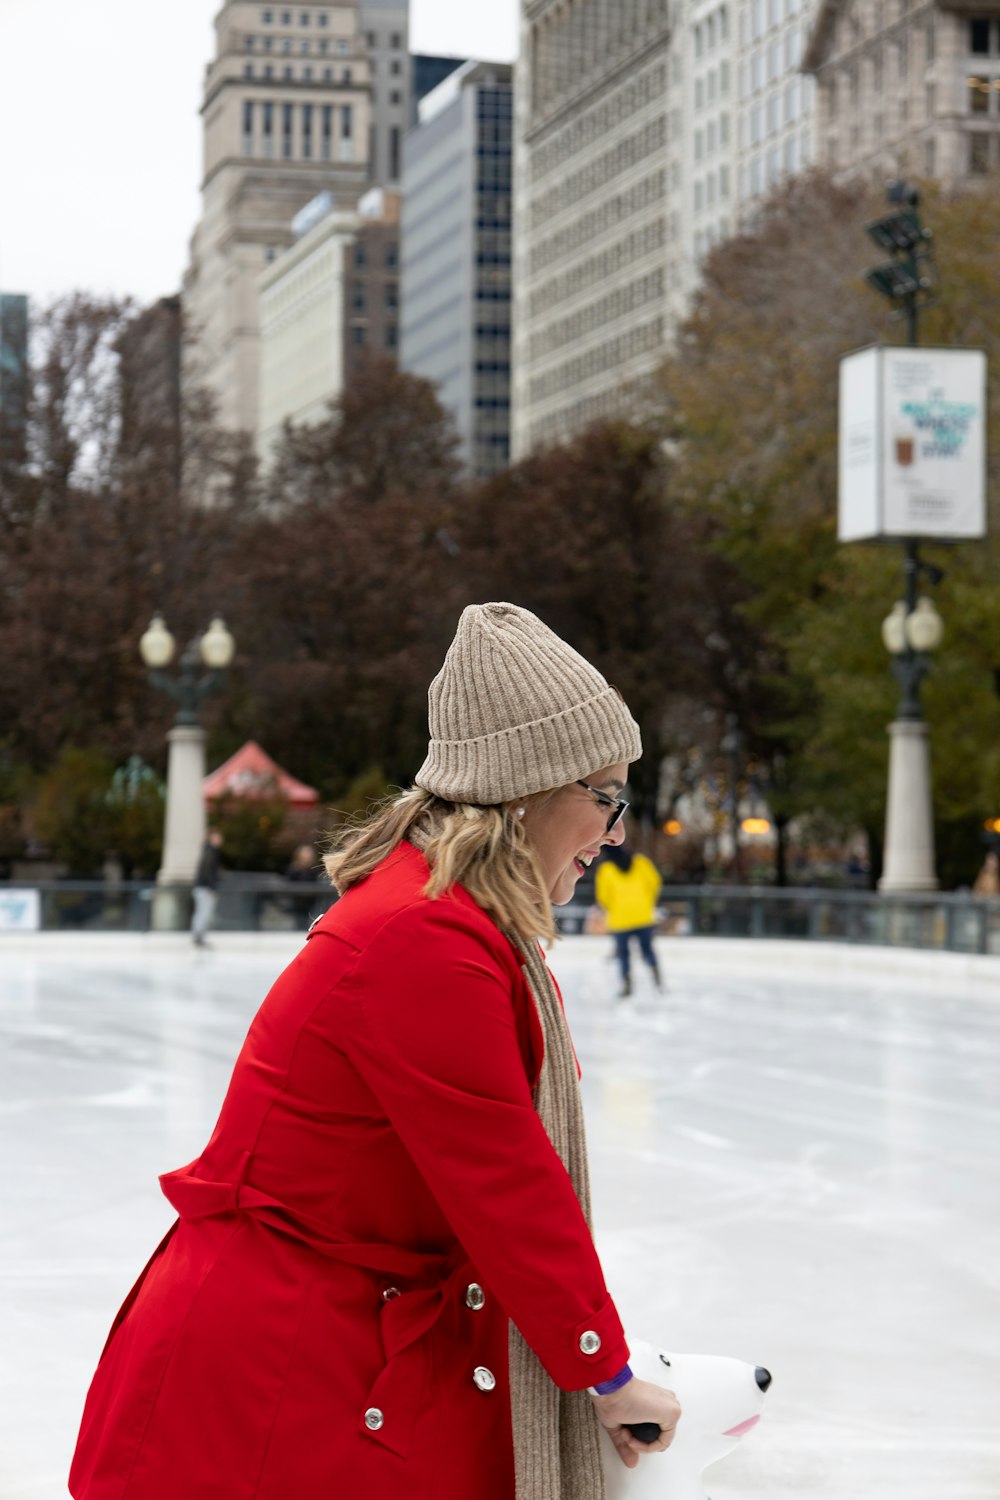 a woman in a red coat skating on an ice rink